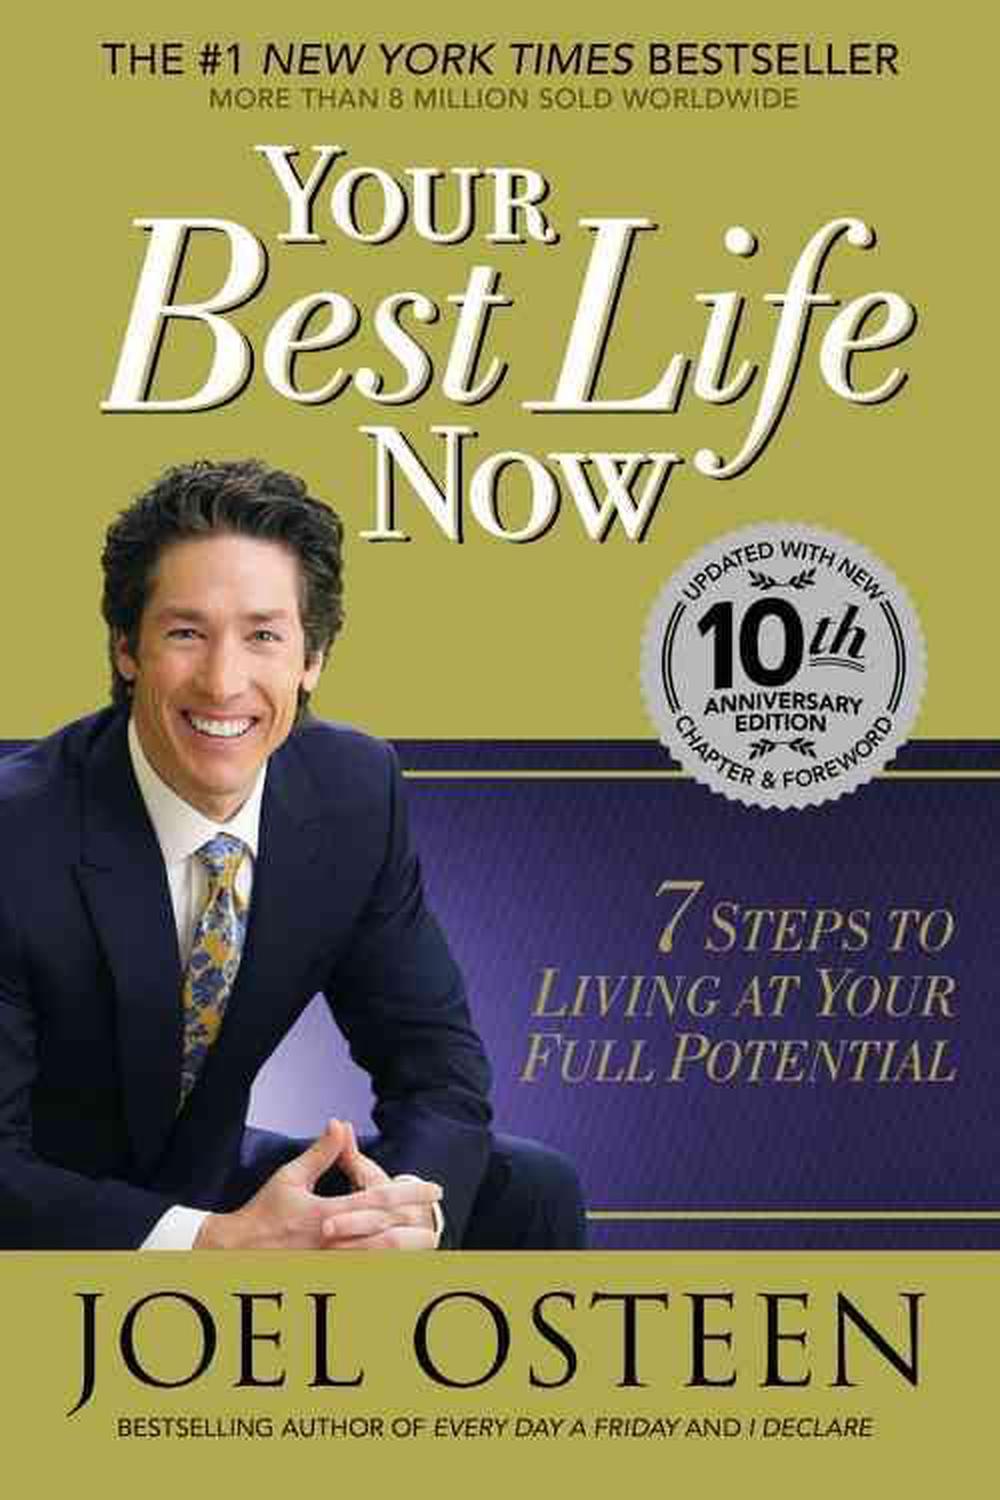 Your Best Life Now 7 Steps to Living at Your Full Potential by Joel